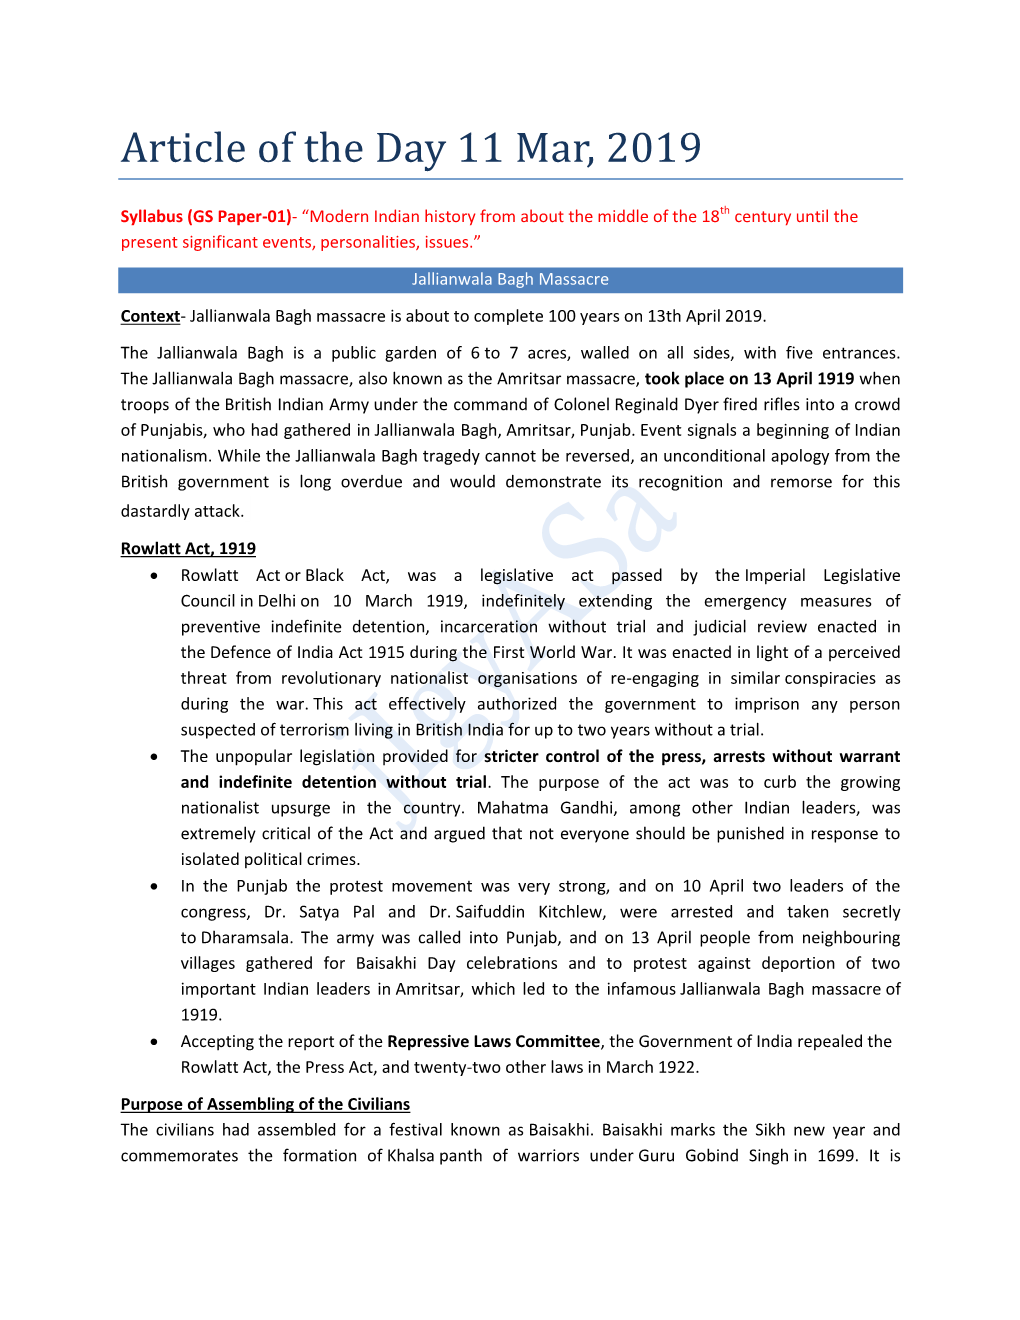 Article of the Day 11 Mar, 2019